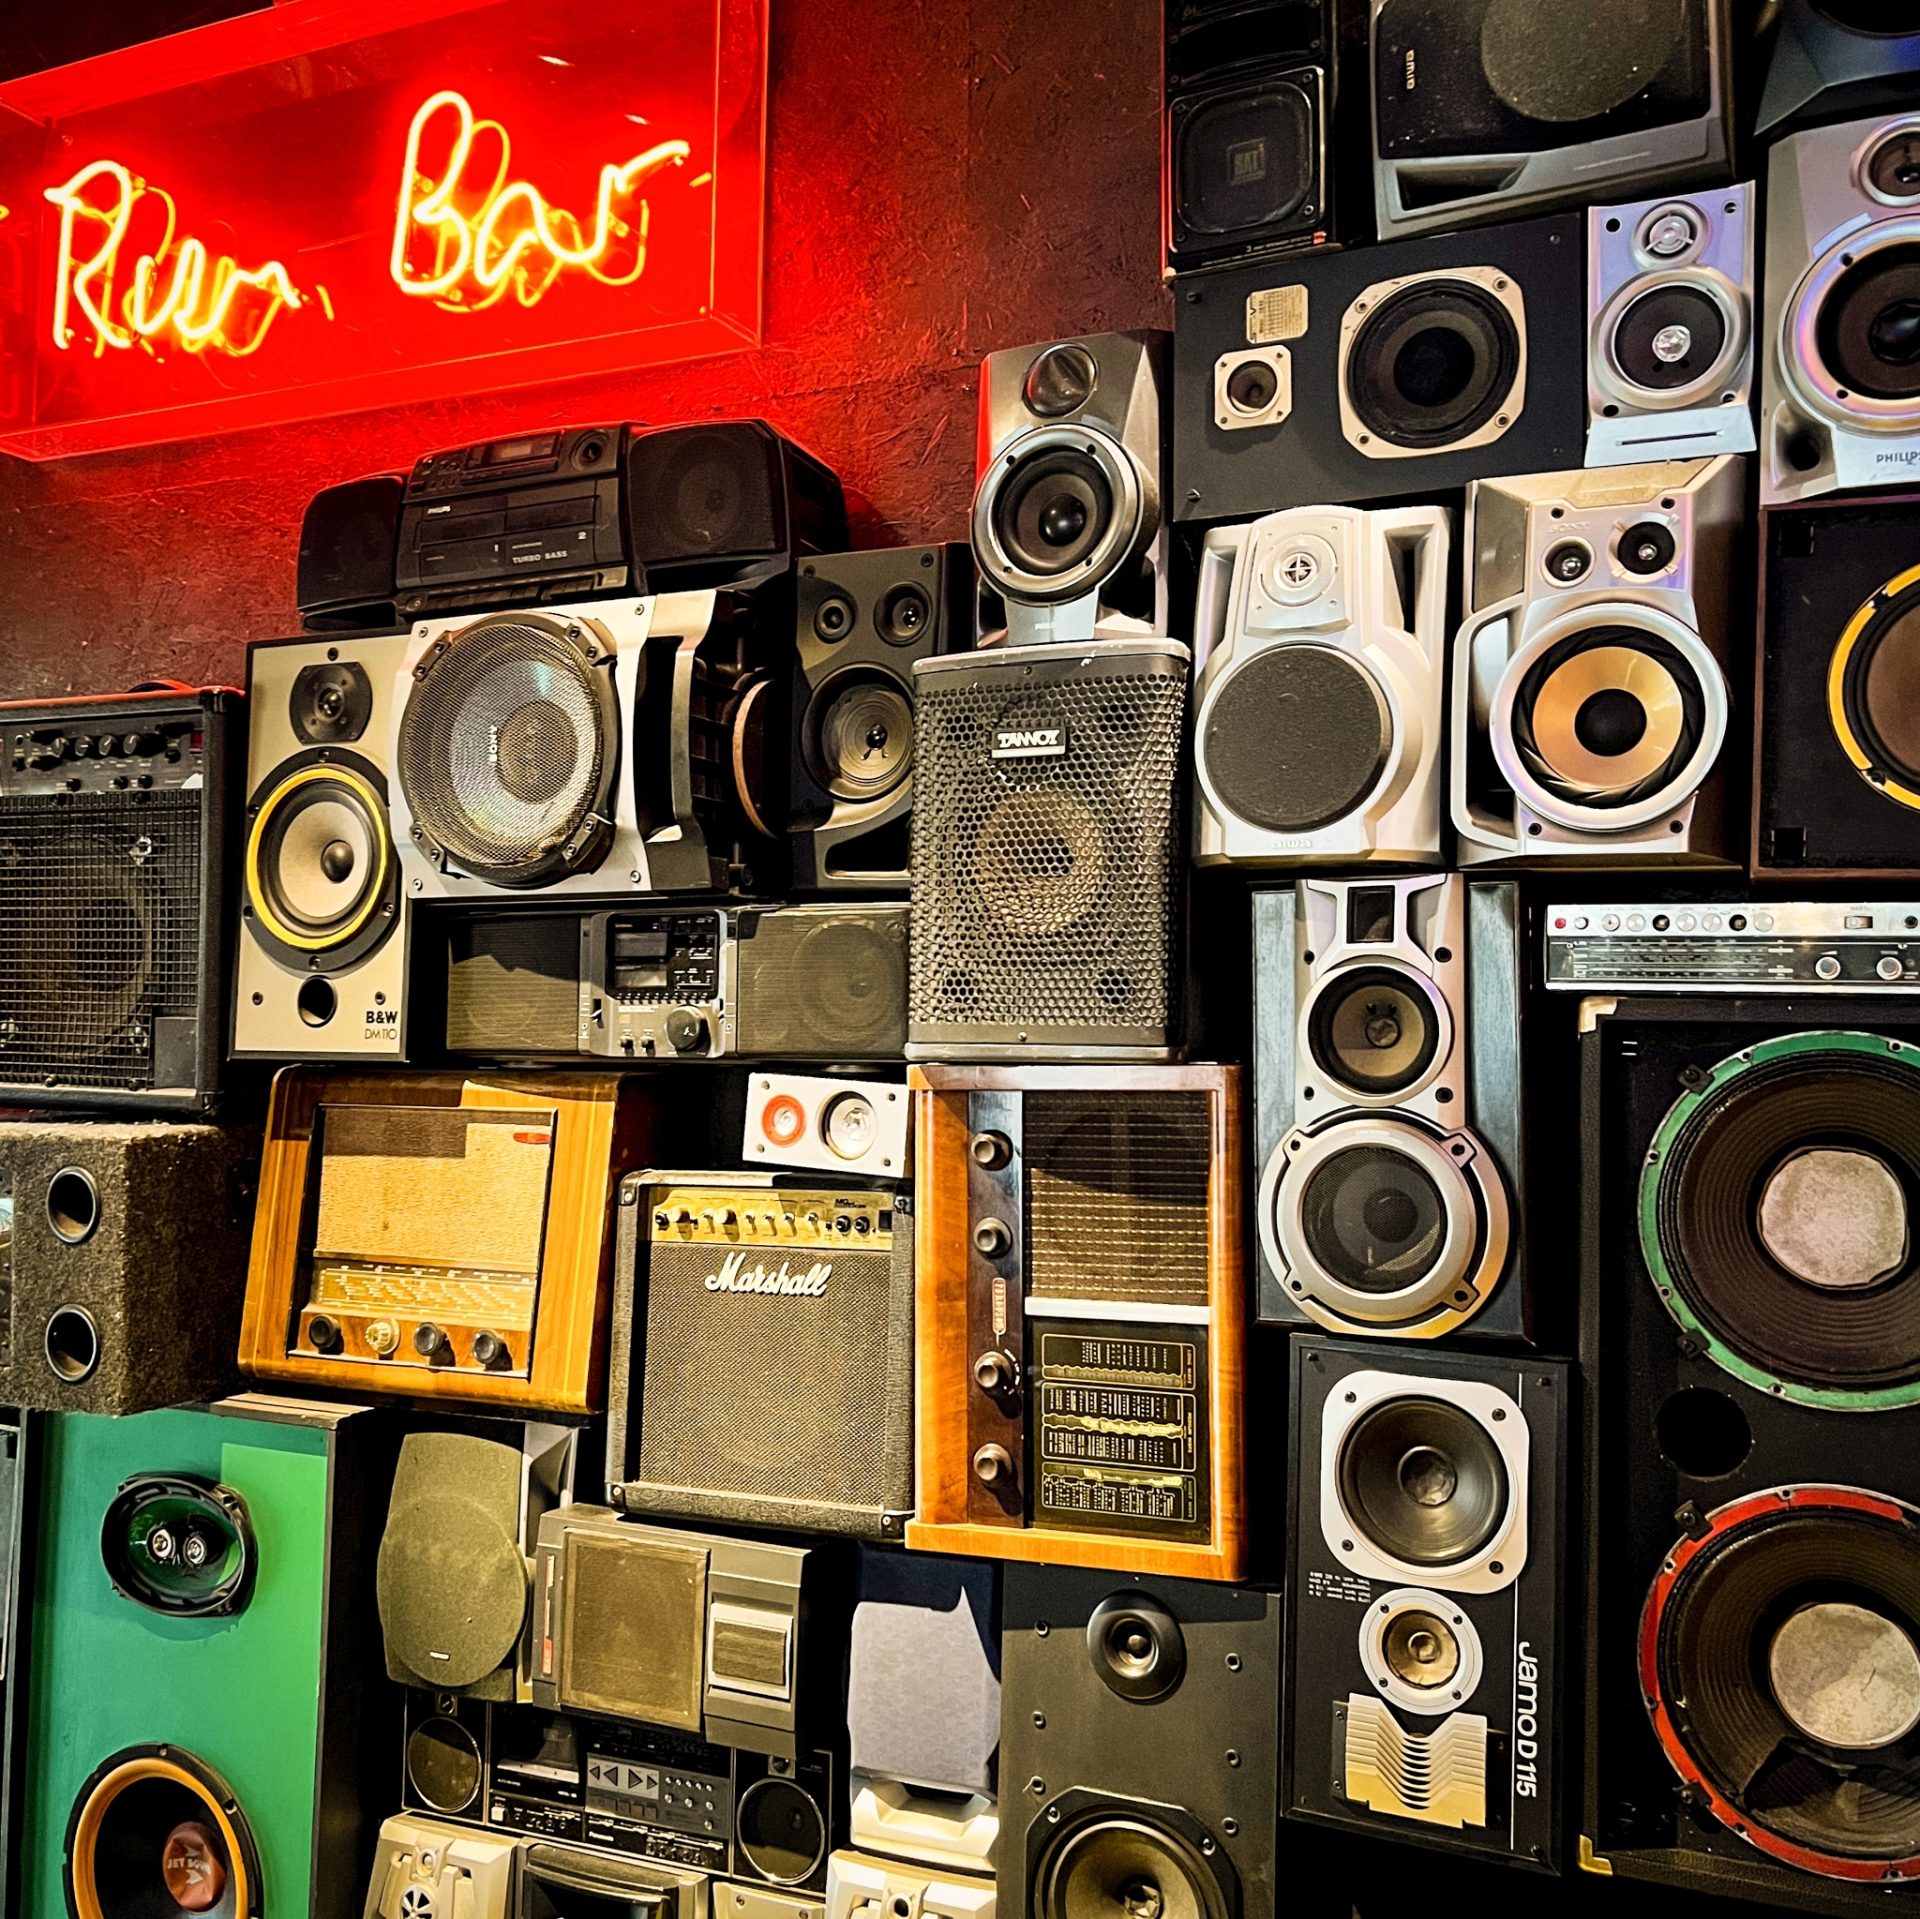 Turtle Bay interior speaker wall and rum bar neon sign